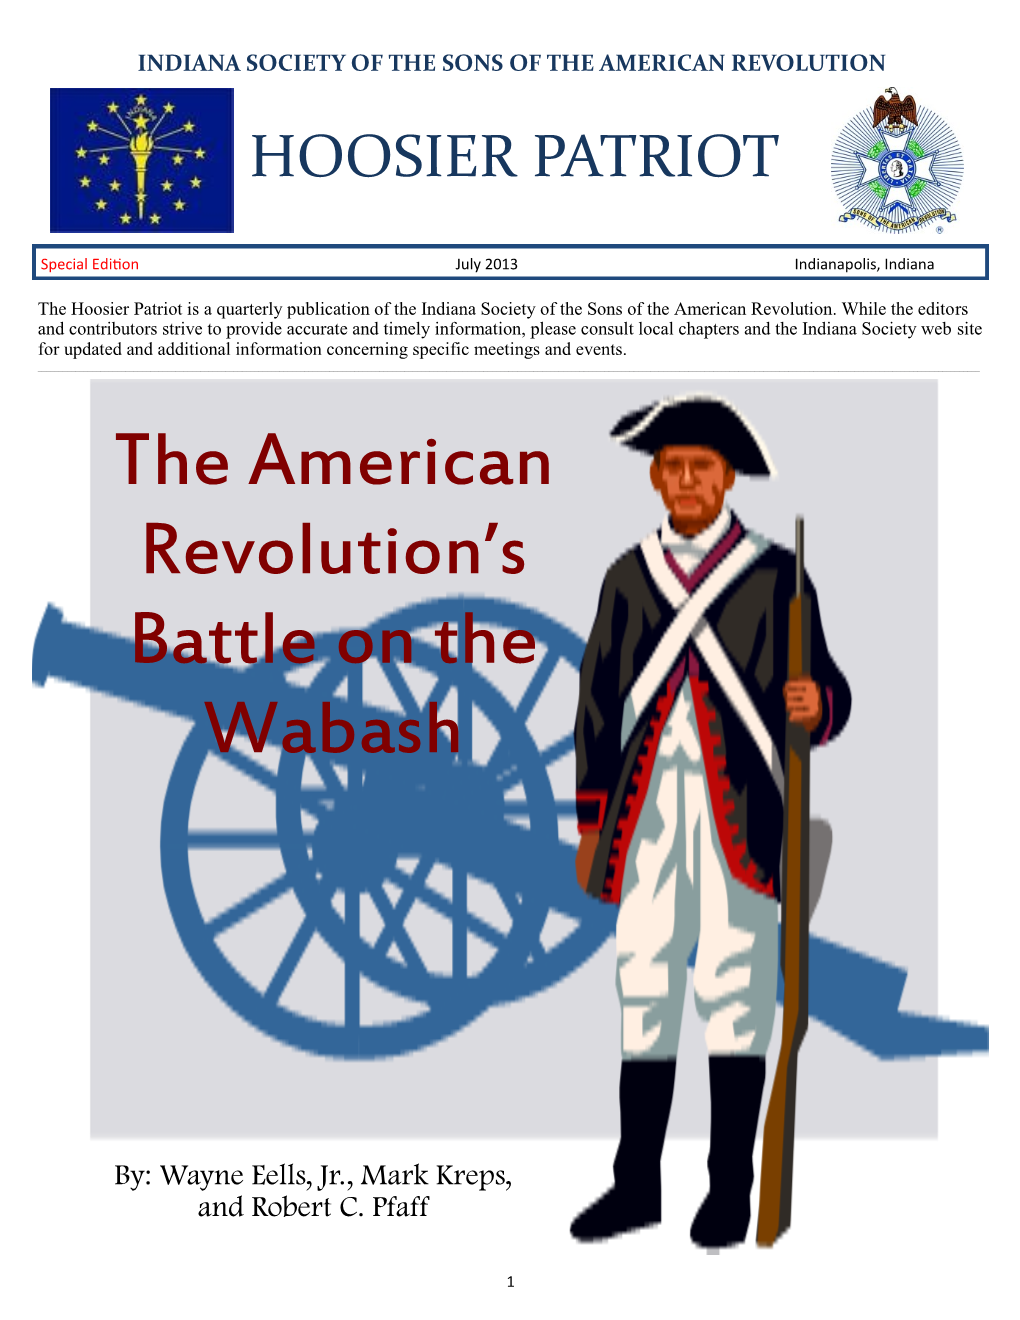 The American Revolution's Battle on the Wabash